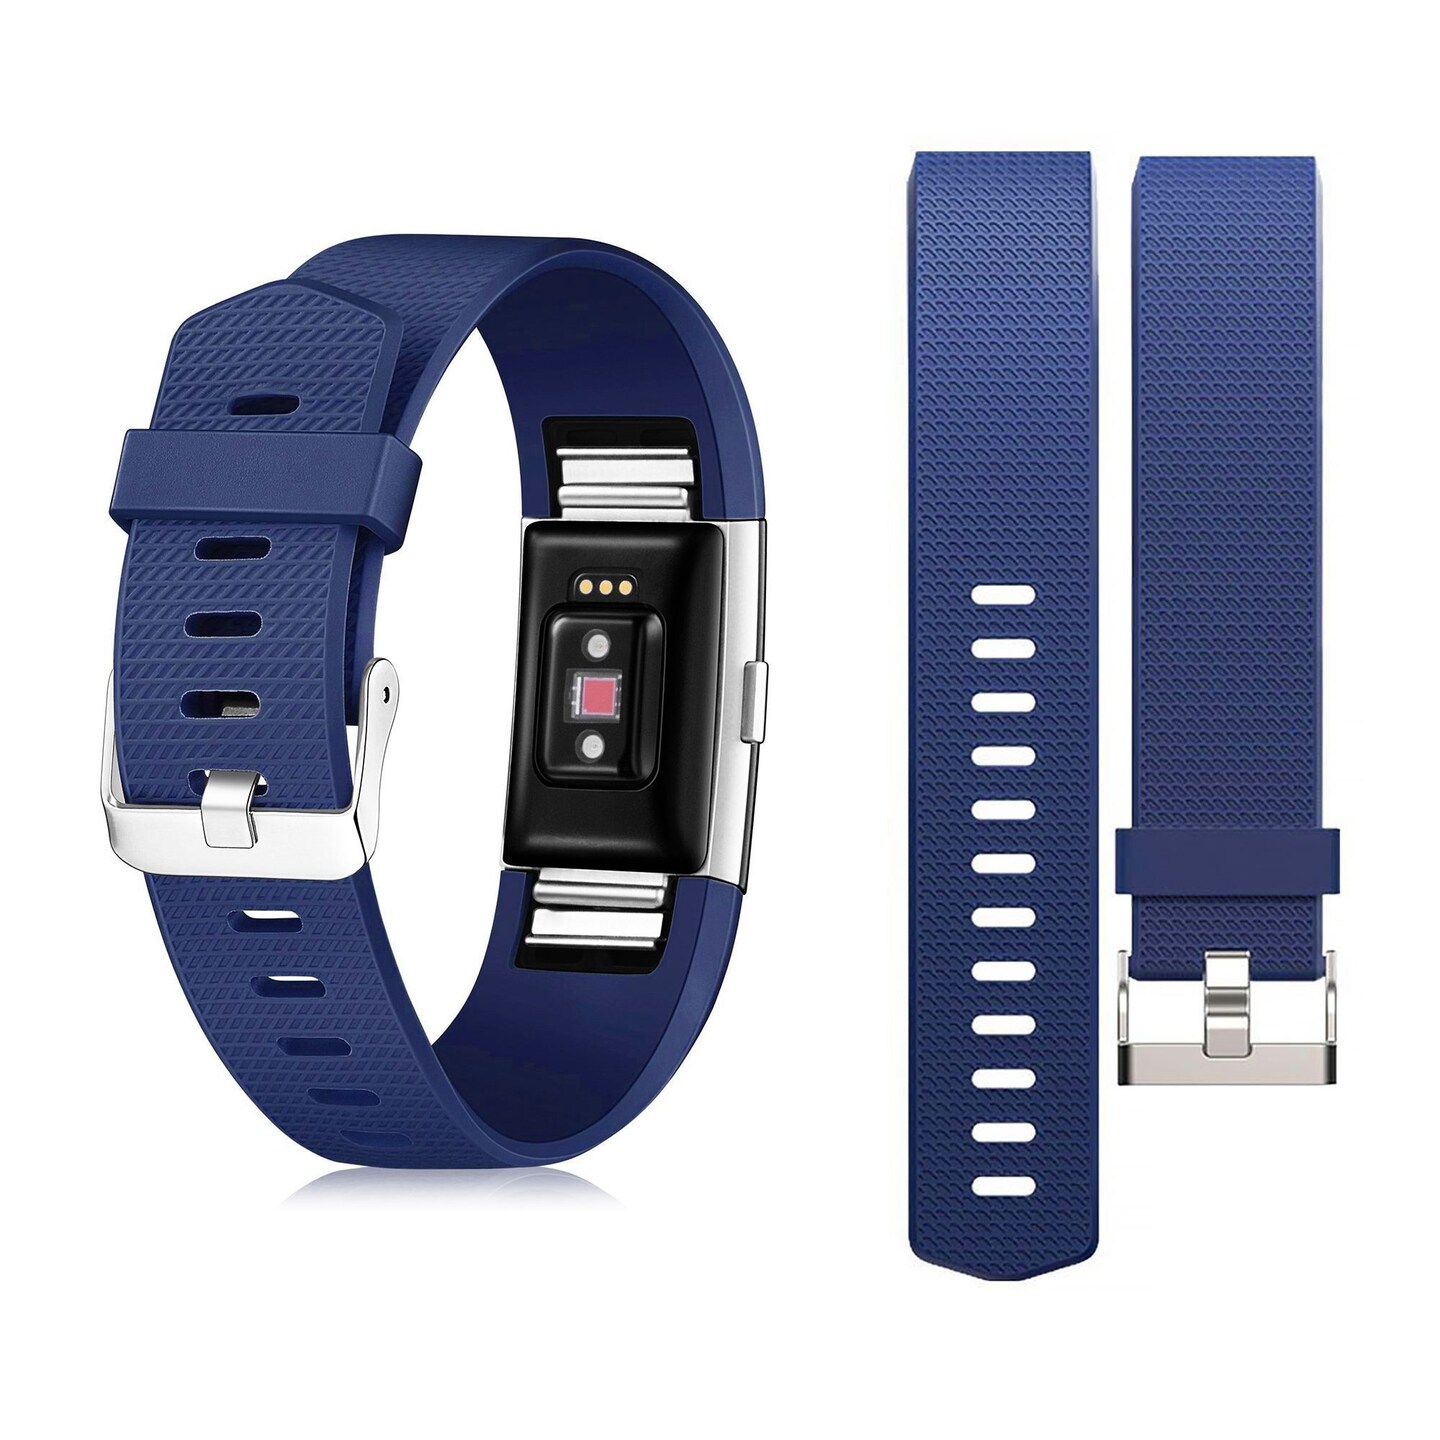 Zodaca for Fitbit Charge 2 Adjustable Replacement TPU Sport Band Strap Wristband w/Metal Buckle Clasp - Dark Blue